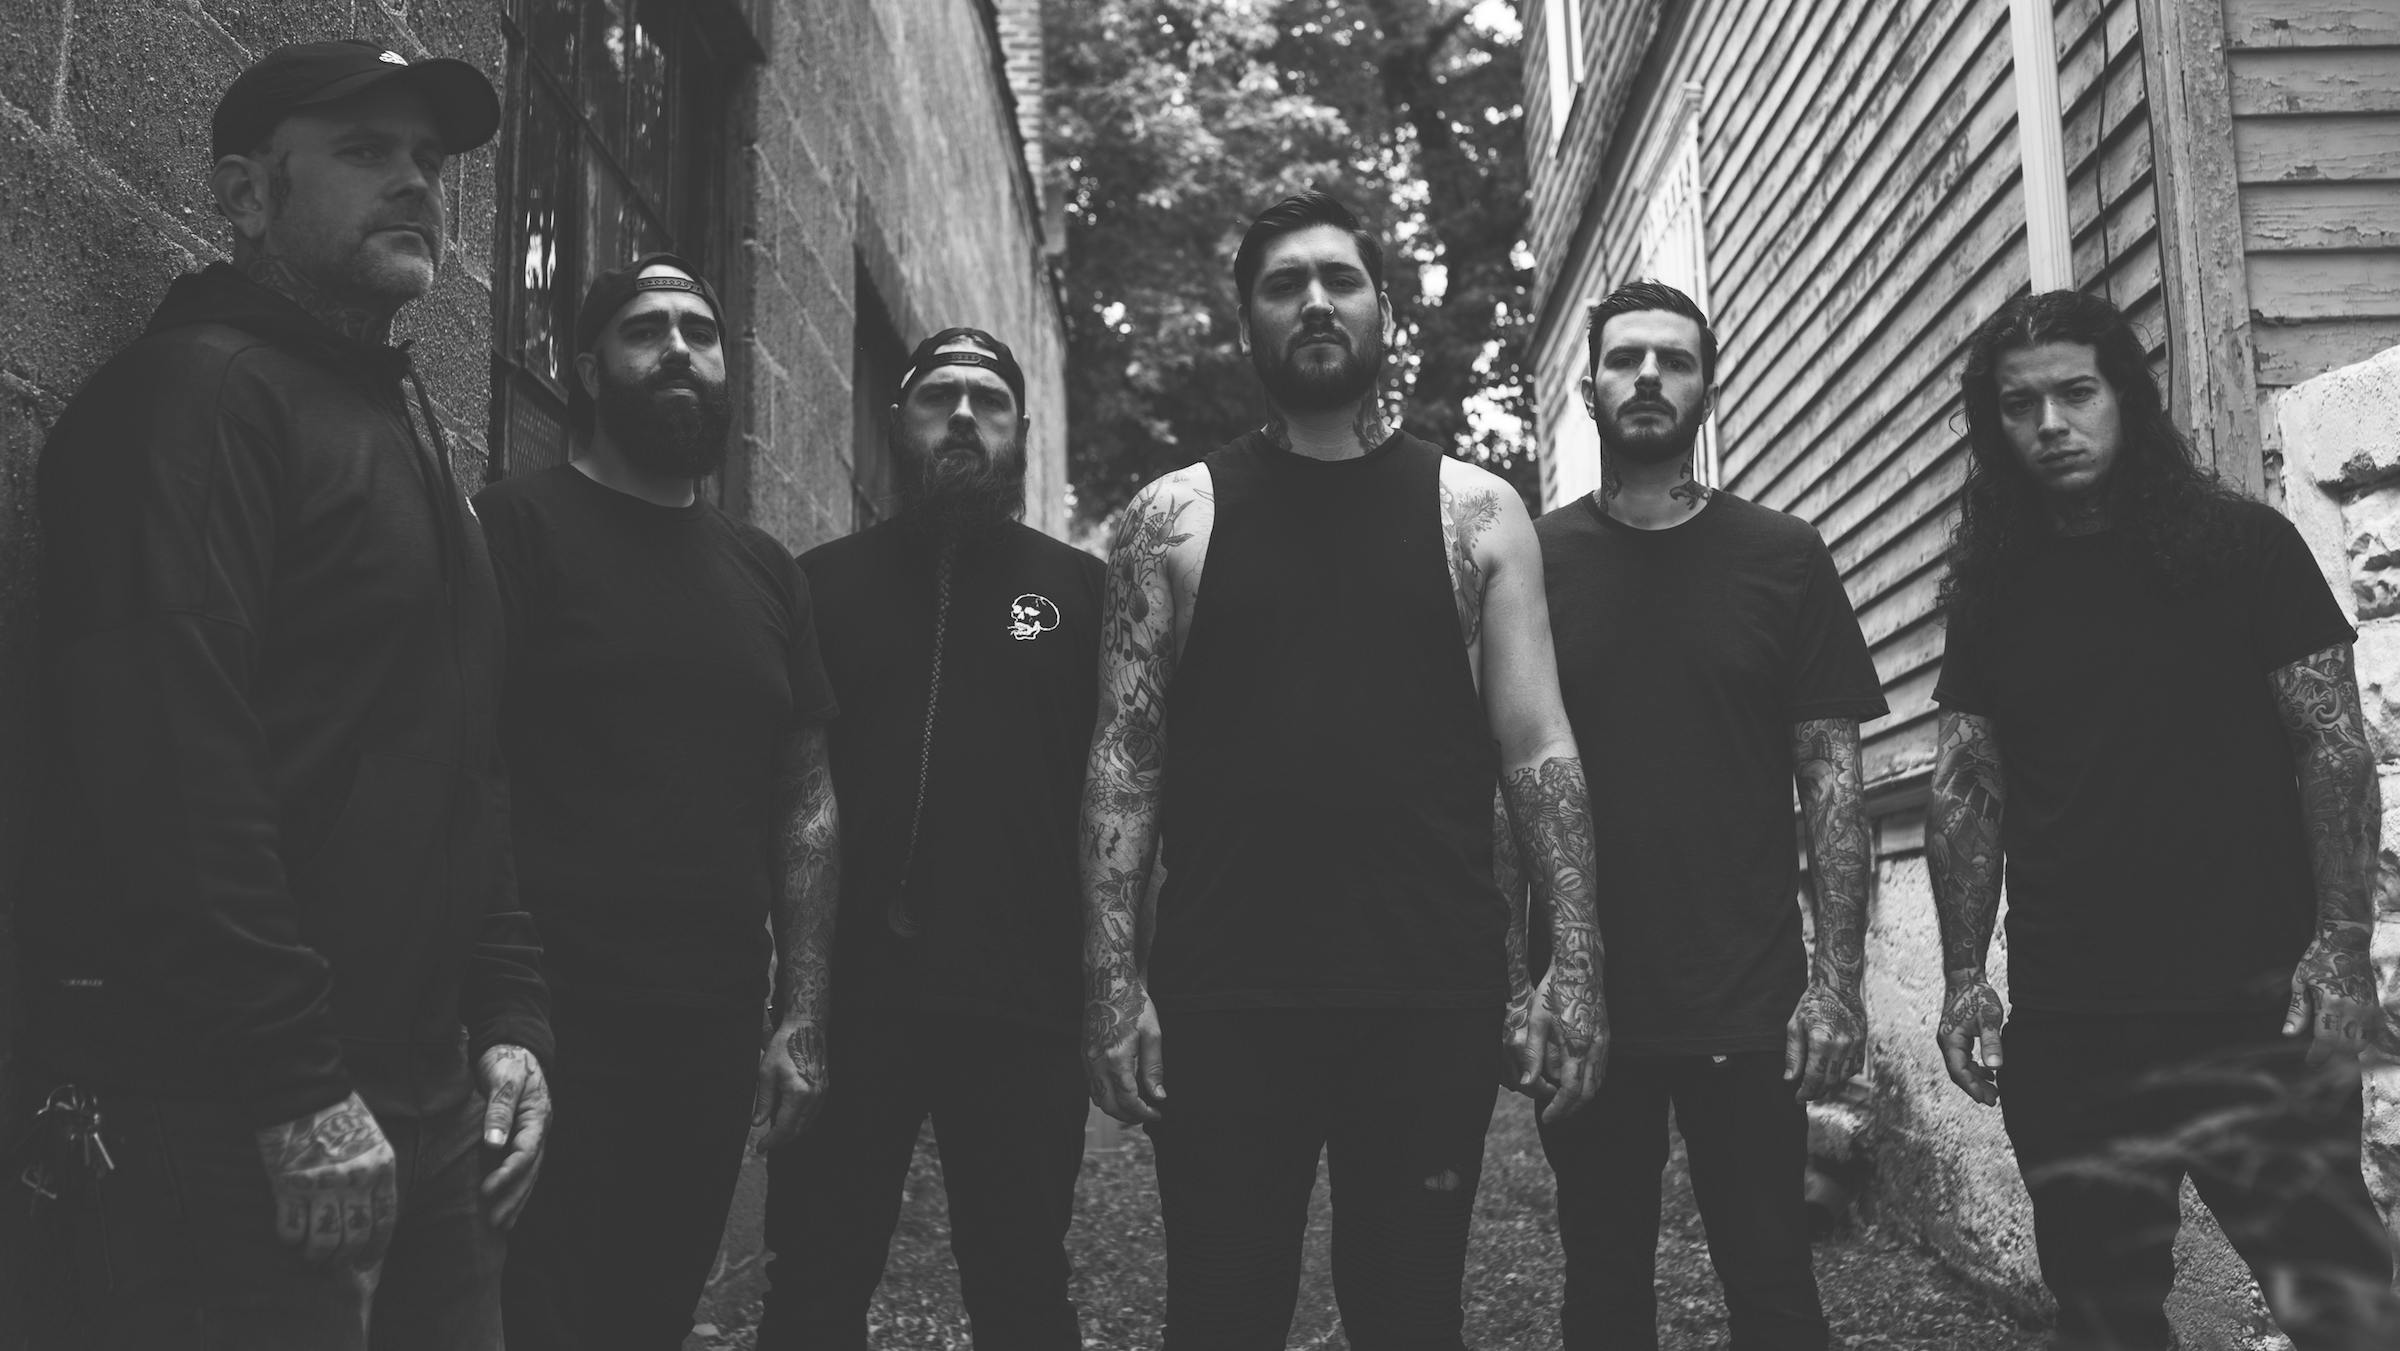 Exclusive: Will Putney On Fit For An Autopsy's New Album